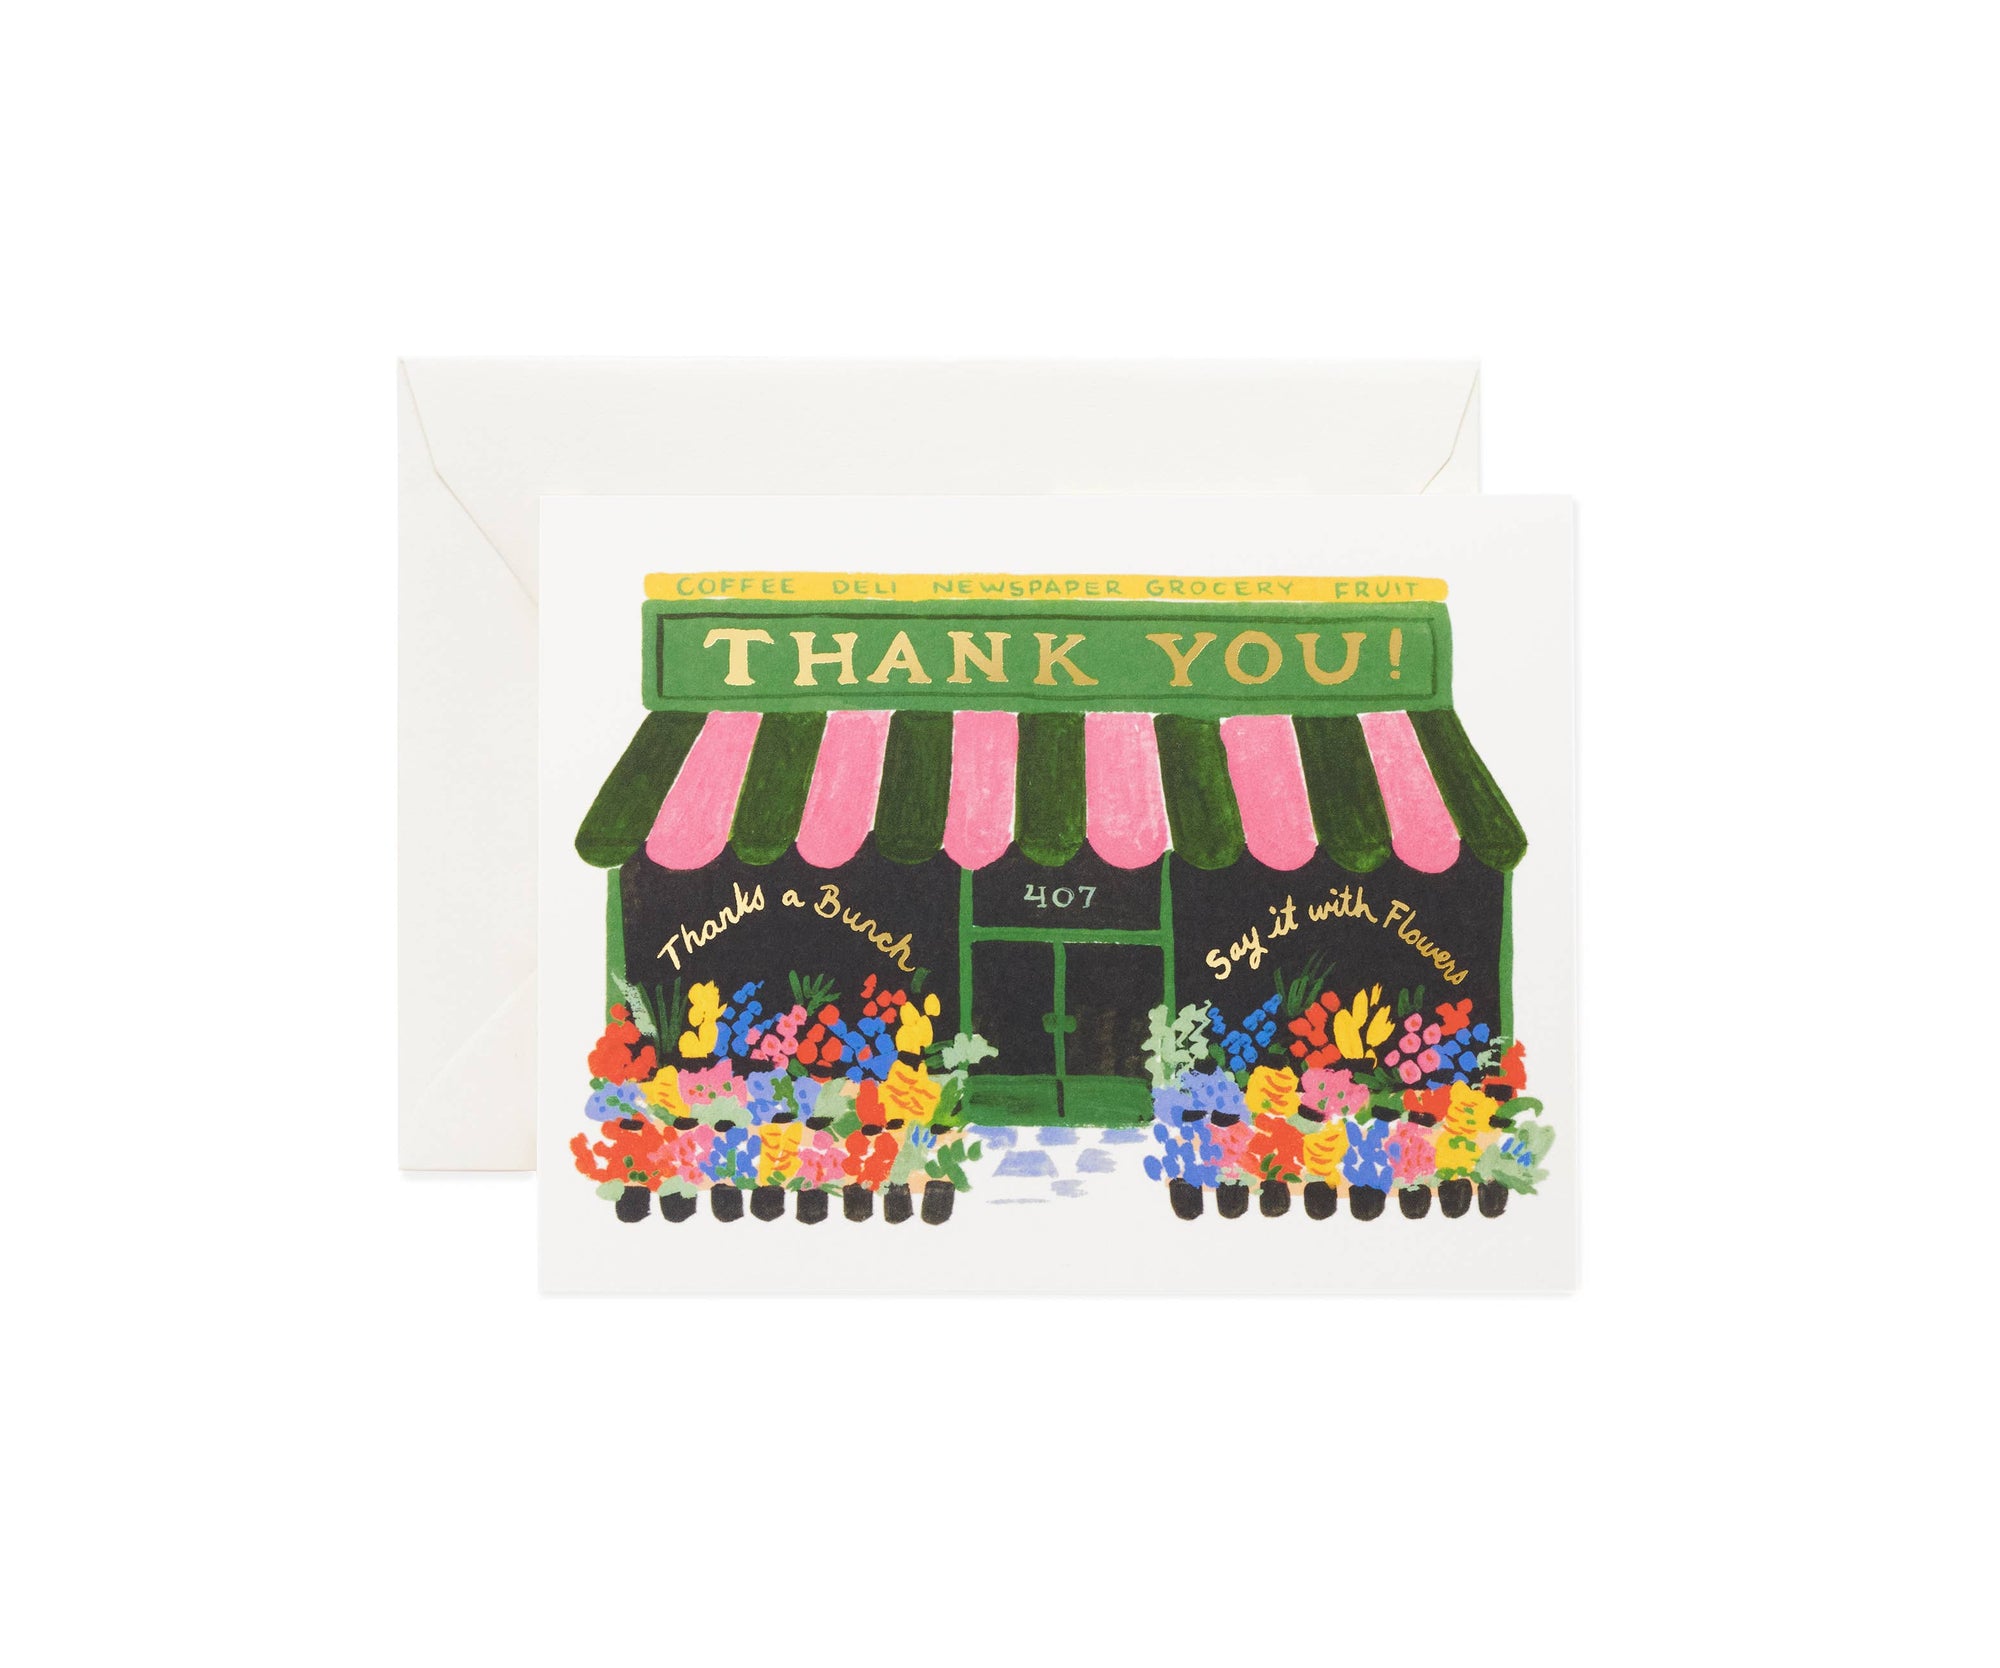 Flower Shop Thank You Card - The Preppy Bunny